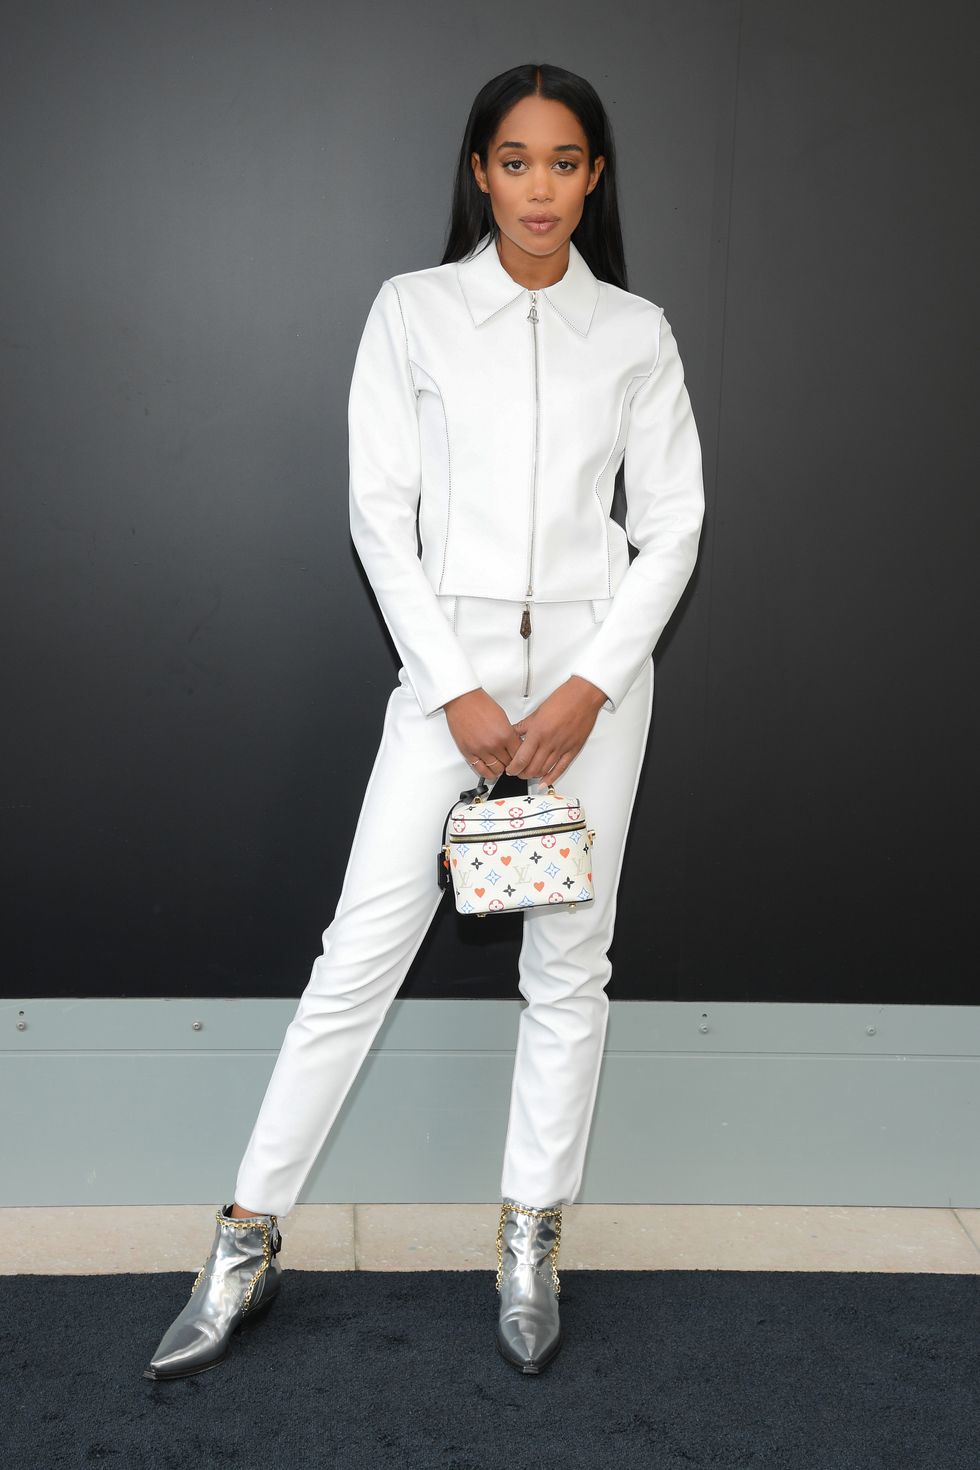 paris, france   october 06 laura harrier attends the louis vuitton womenswear springsummer 2021 show as part of paris fashion week on october 06, 2020 in paris, france photo by pascal le segretaingetty images